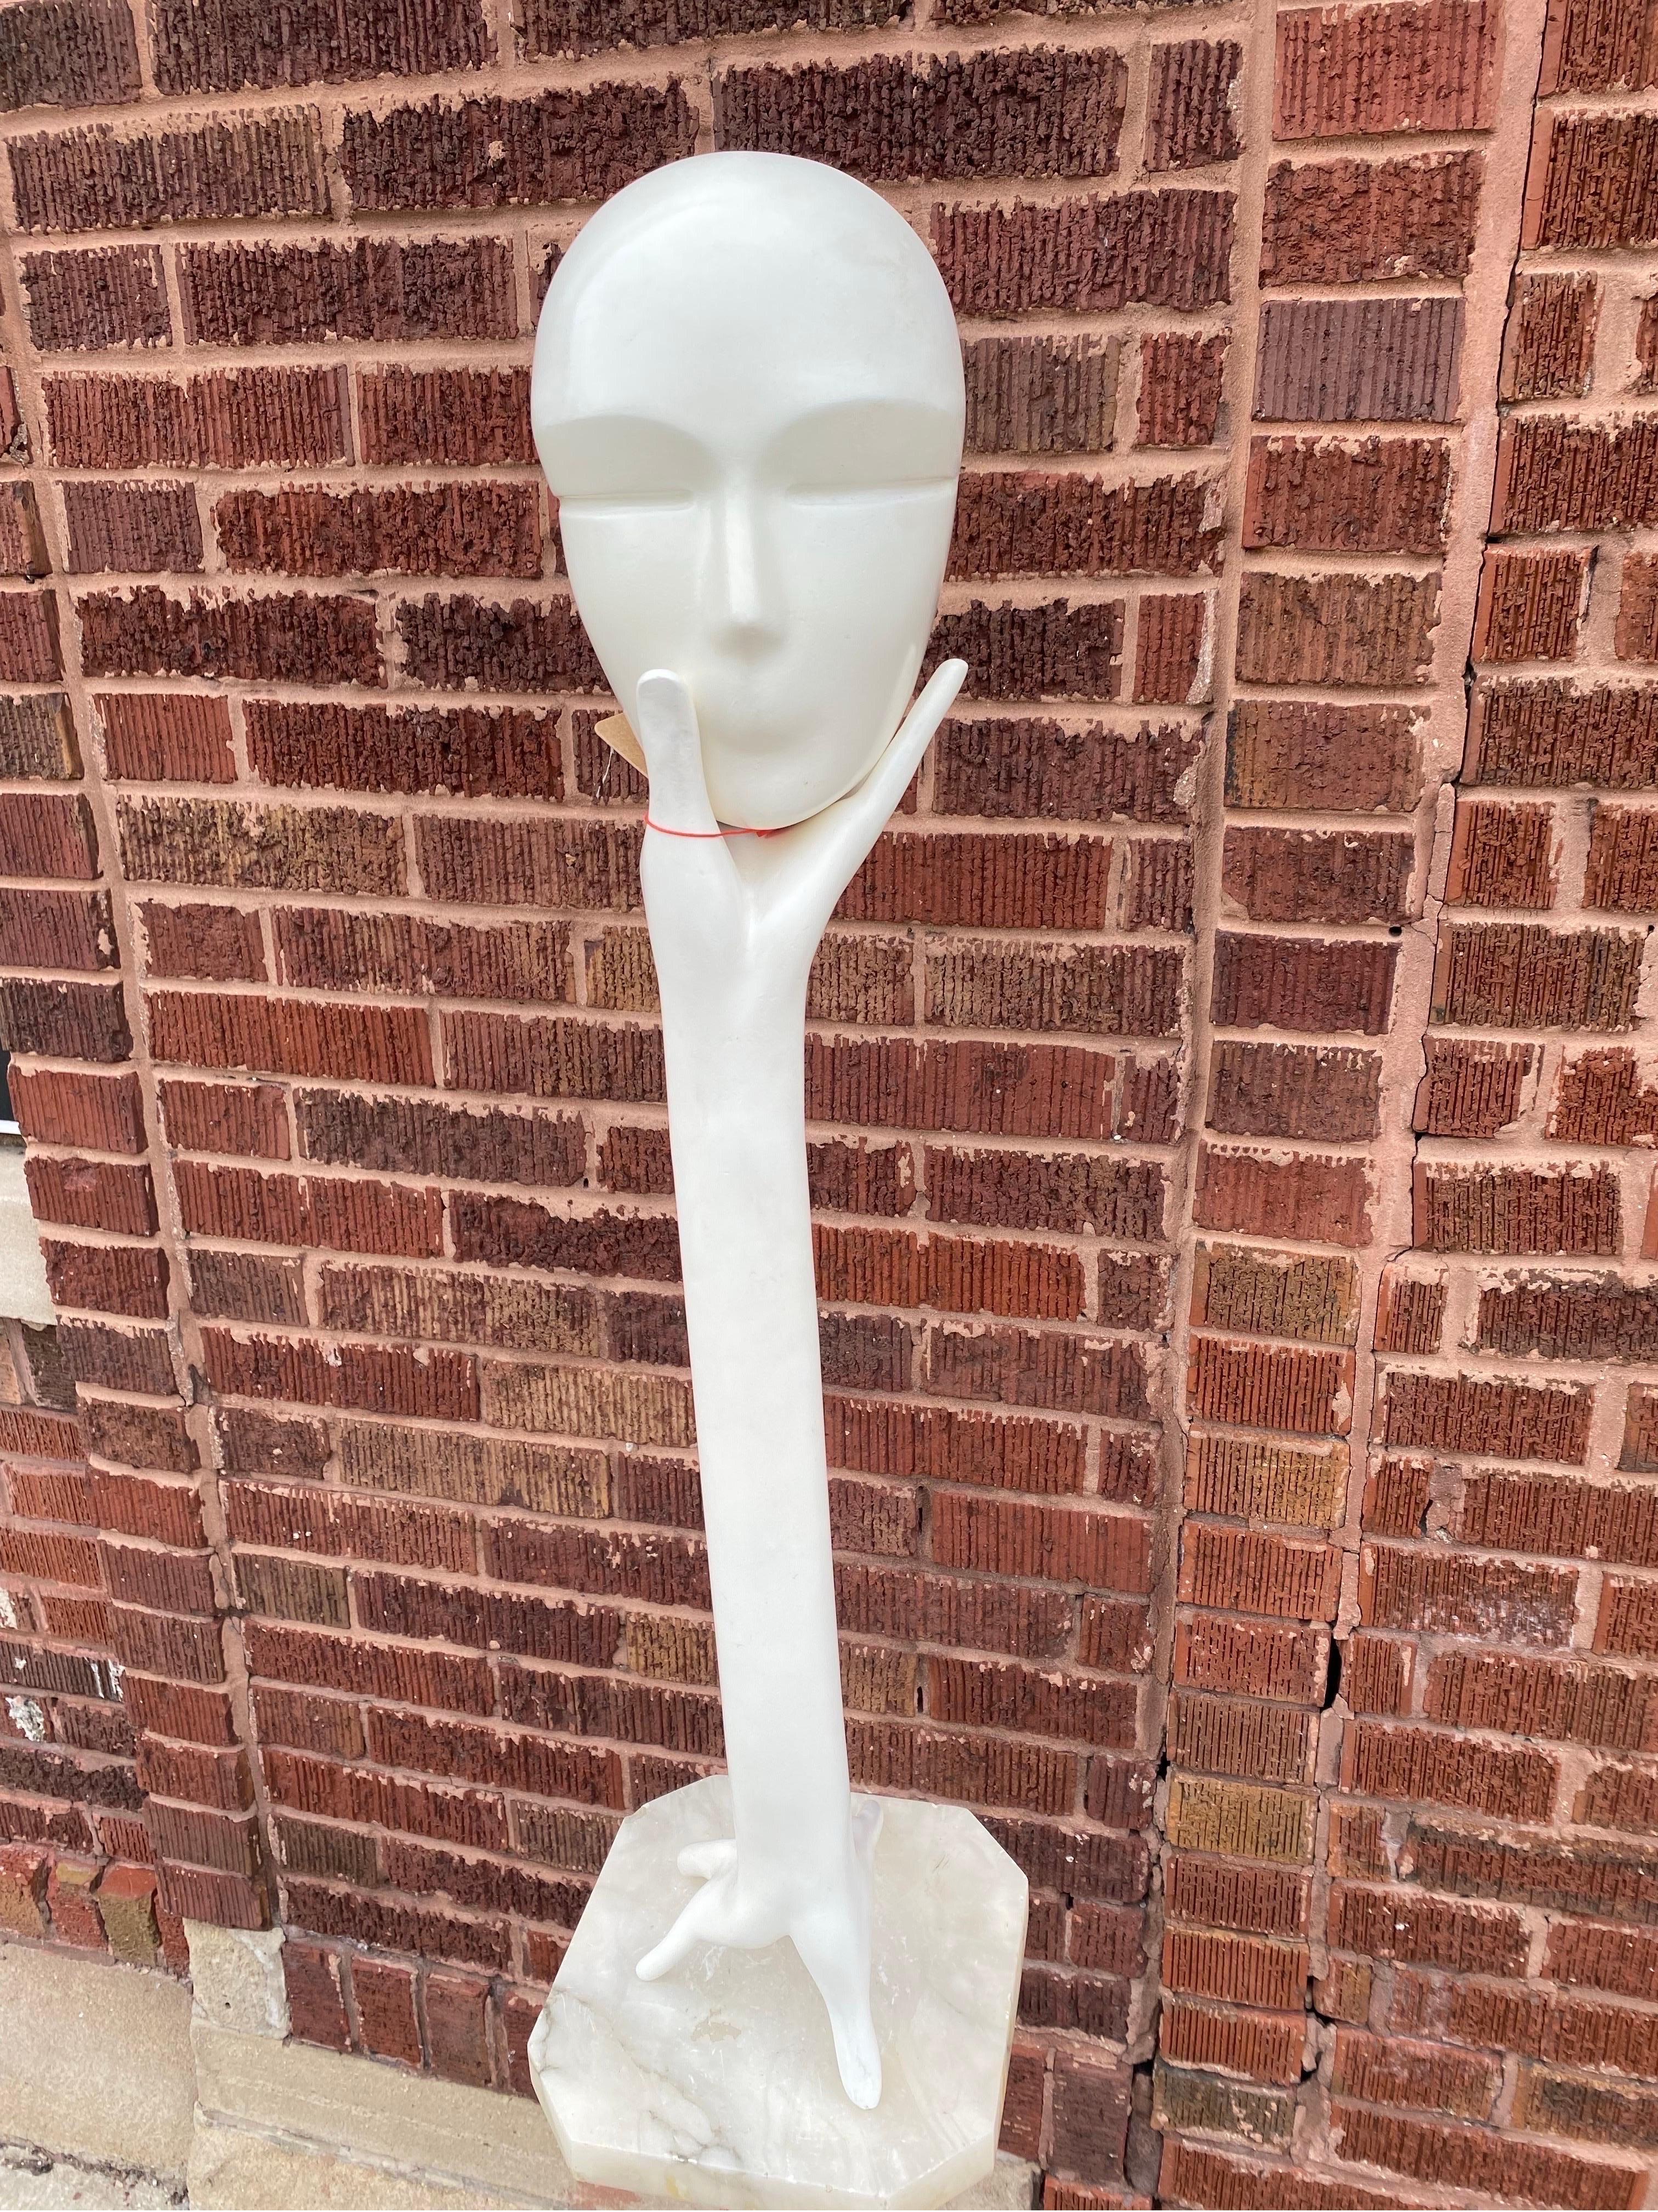 Head-in-Hand 1990s Tall White Sculpture

This white painted wood sculpture depicts an arm with a stretched out hand on either end. A head balances on the hand’s fingertips. The head is not attached to hand. It would be an artistic hat stand for your